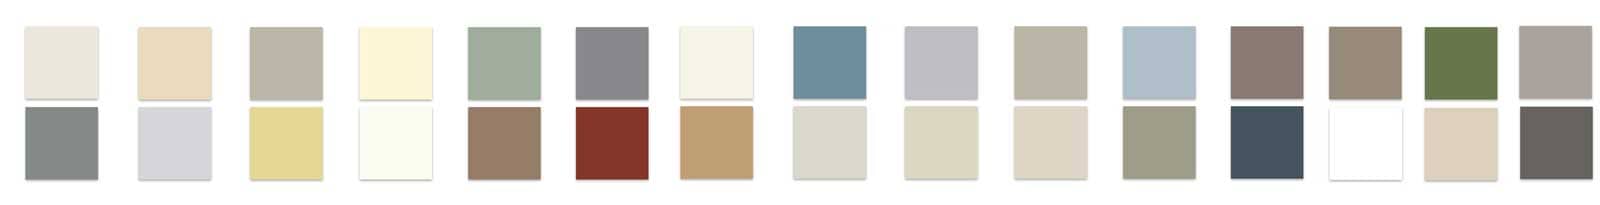 Squares of available siding colors